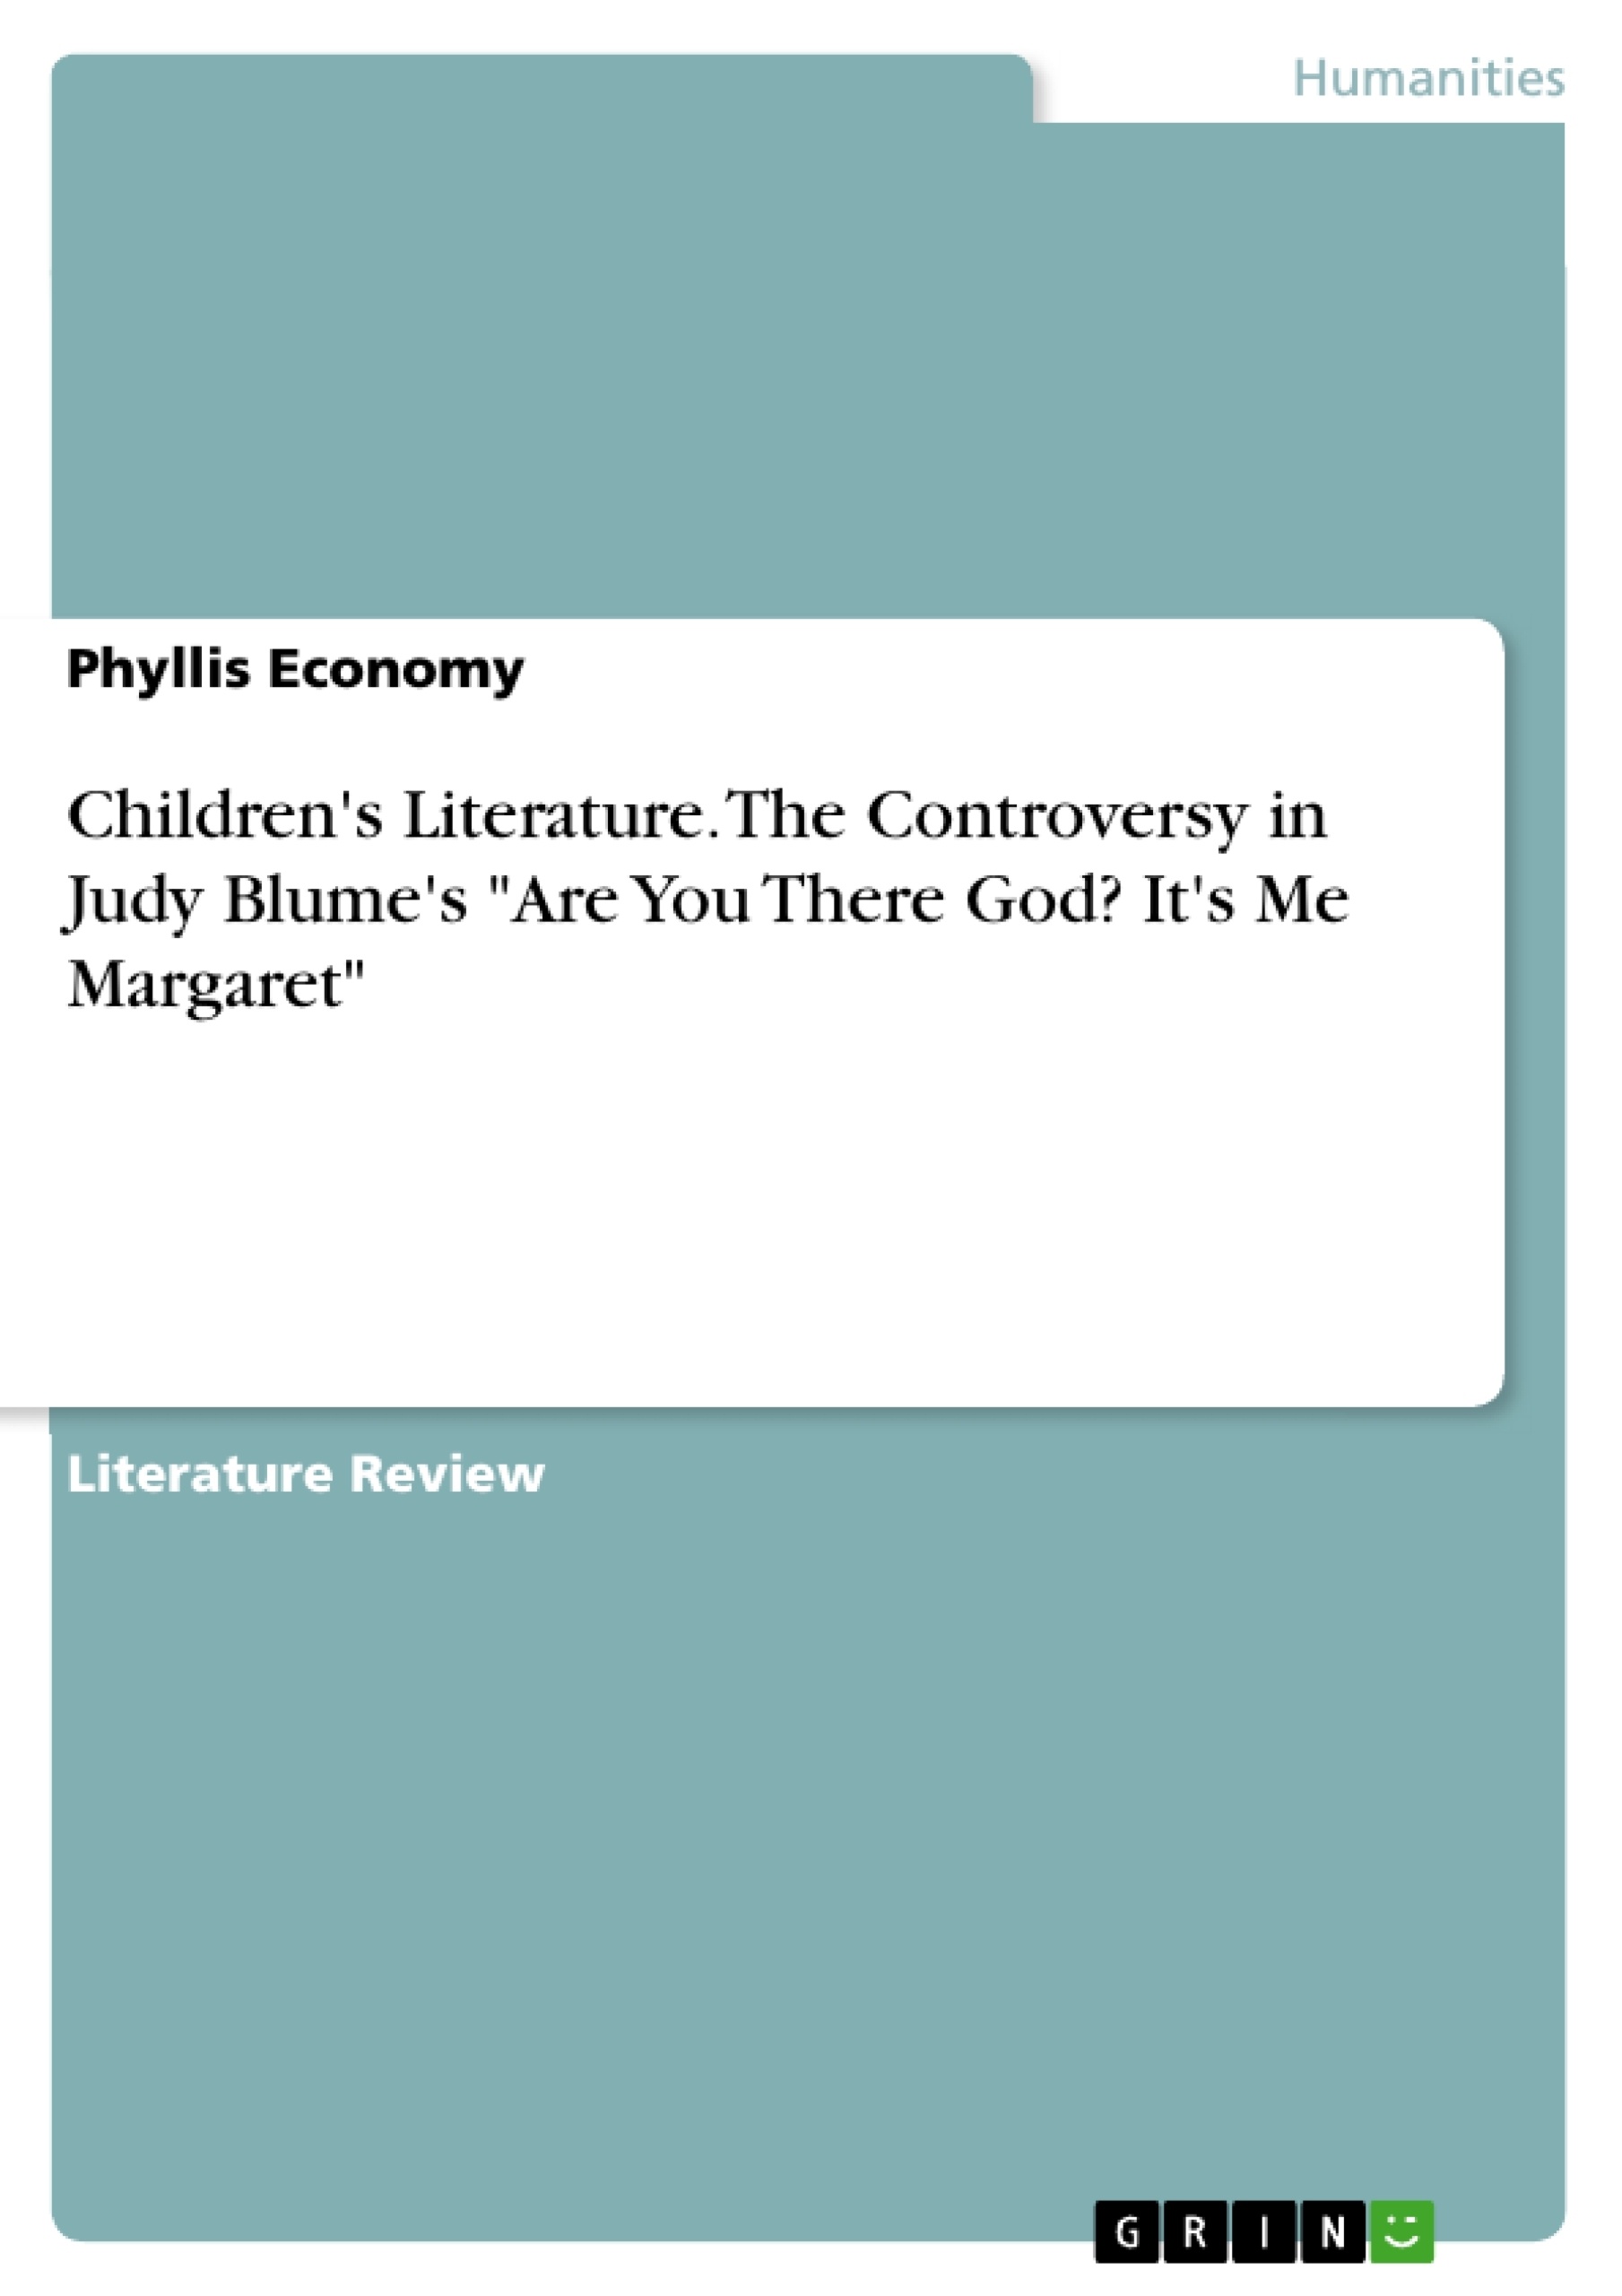 Titre: Children's Literature. The Controversy in Judy Blume's "Are You There God? It's Me Margaret"